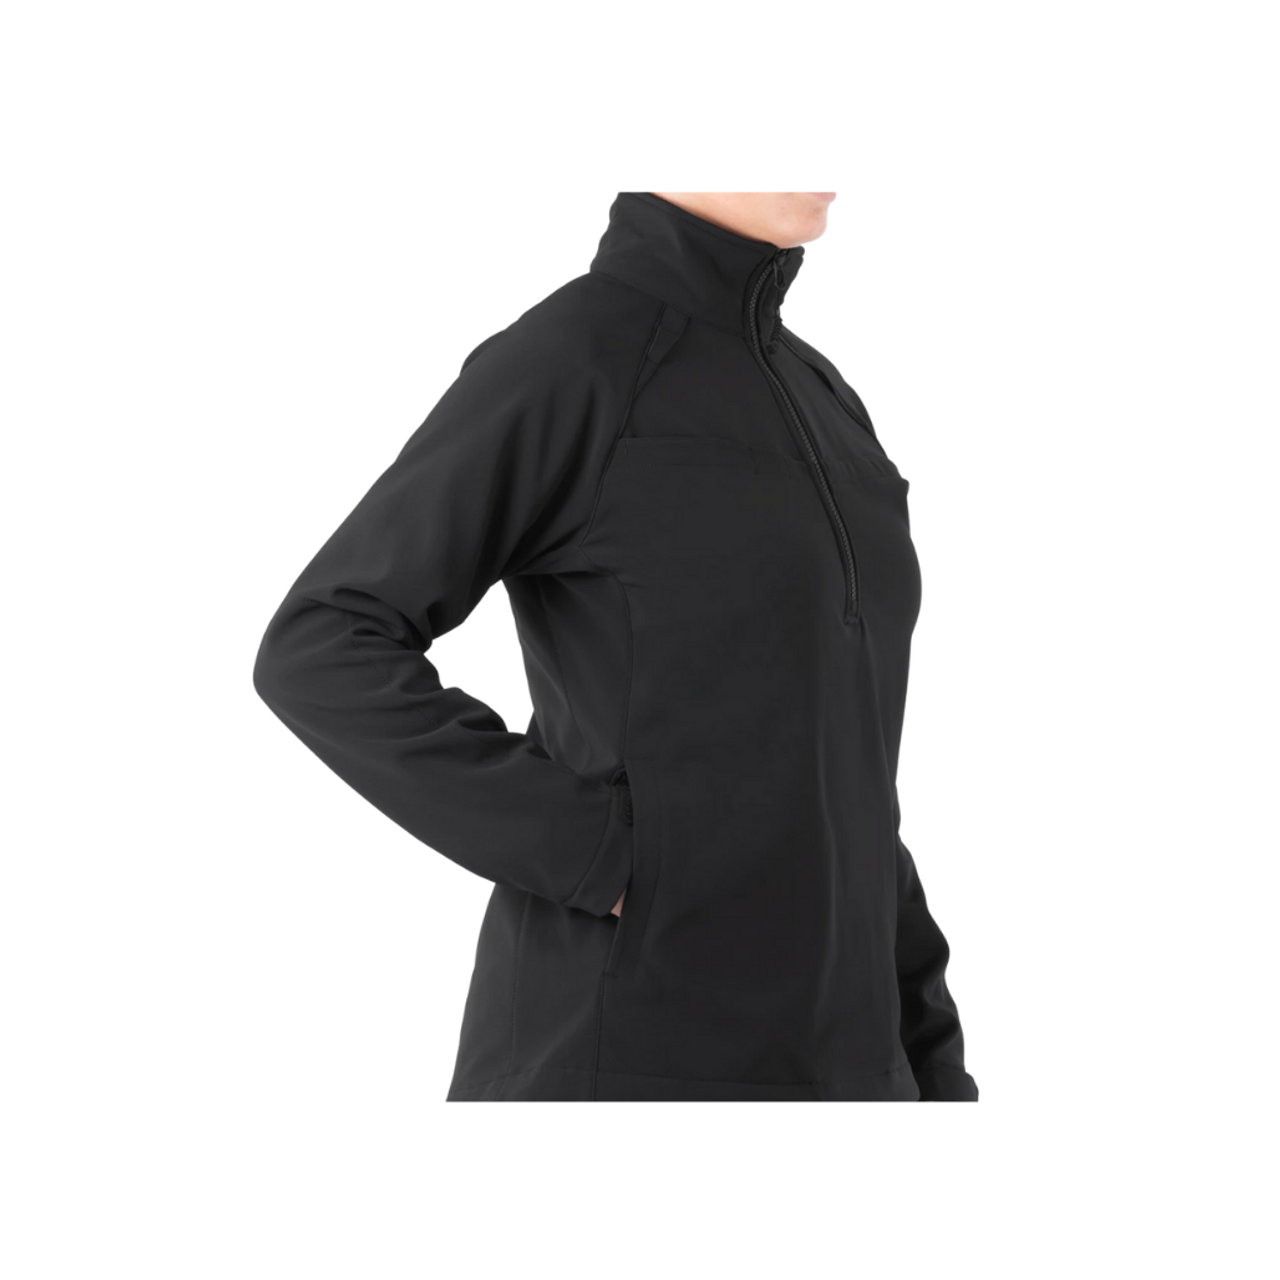 The Women's SoftShell Job Shirt is made to fit the demands of your job so you can stay on the move. 1/2 zip styling gives you ultimate security. 4-way stretch warm and wind resistant shell provides durability for repeated pullover action, and a soft fleece lining keeps you warm and comfortable. Made with premium hardware and styled with easy access mic loops, you won’t find job shirt more suited for you.